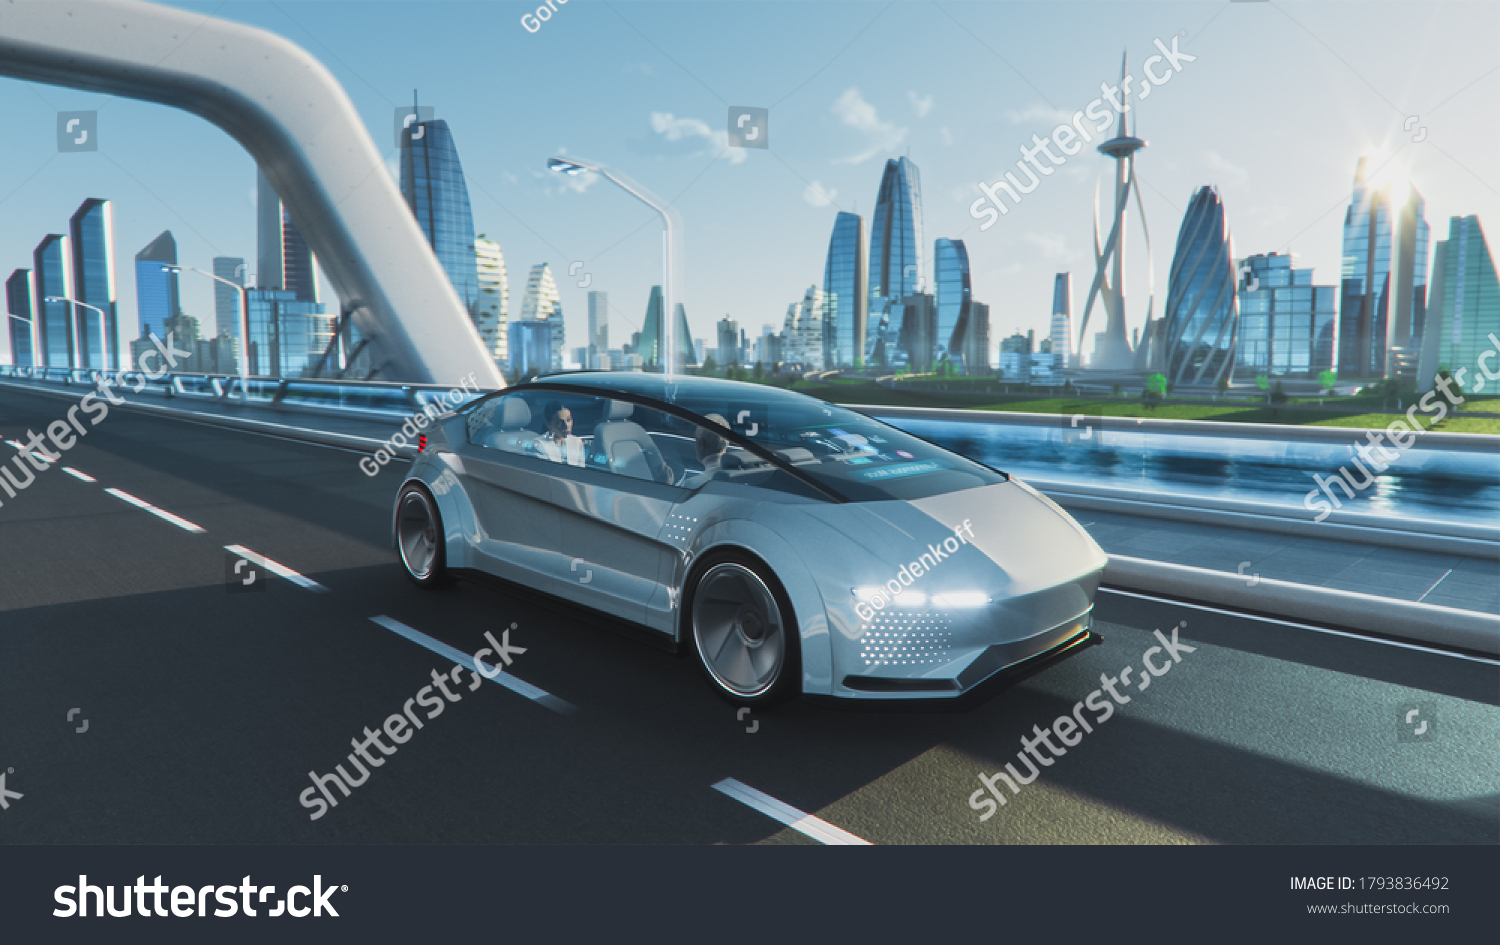 Shot of a Futuristic Self-Driving Van Moving on a Public Highway in a Modern City with Glass Skyscrapers. Beautiful Female and Senior Man are Having a Conversation in a Driverless Autonomous Vehicle. #1793836492